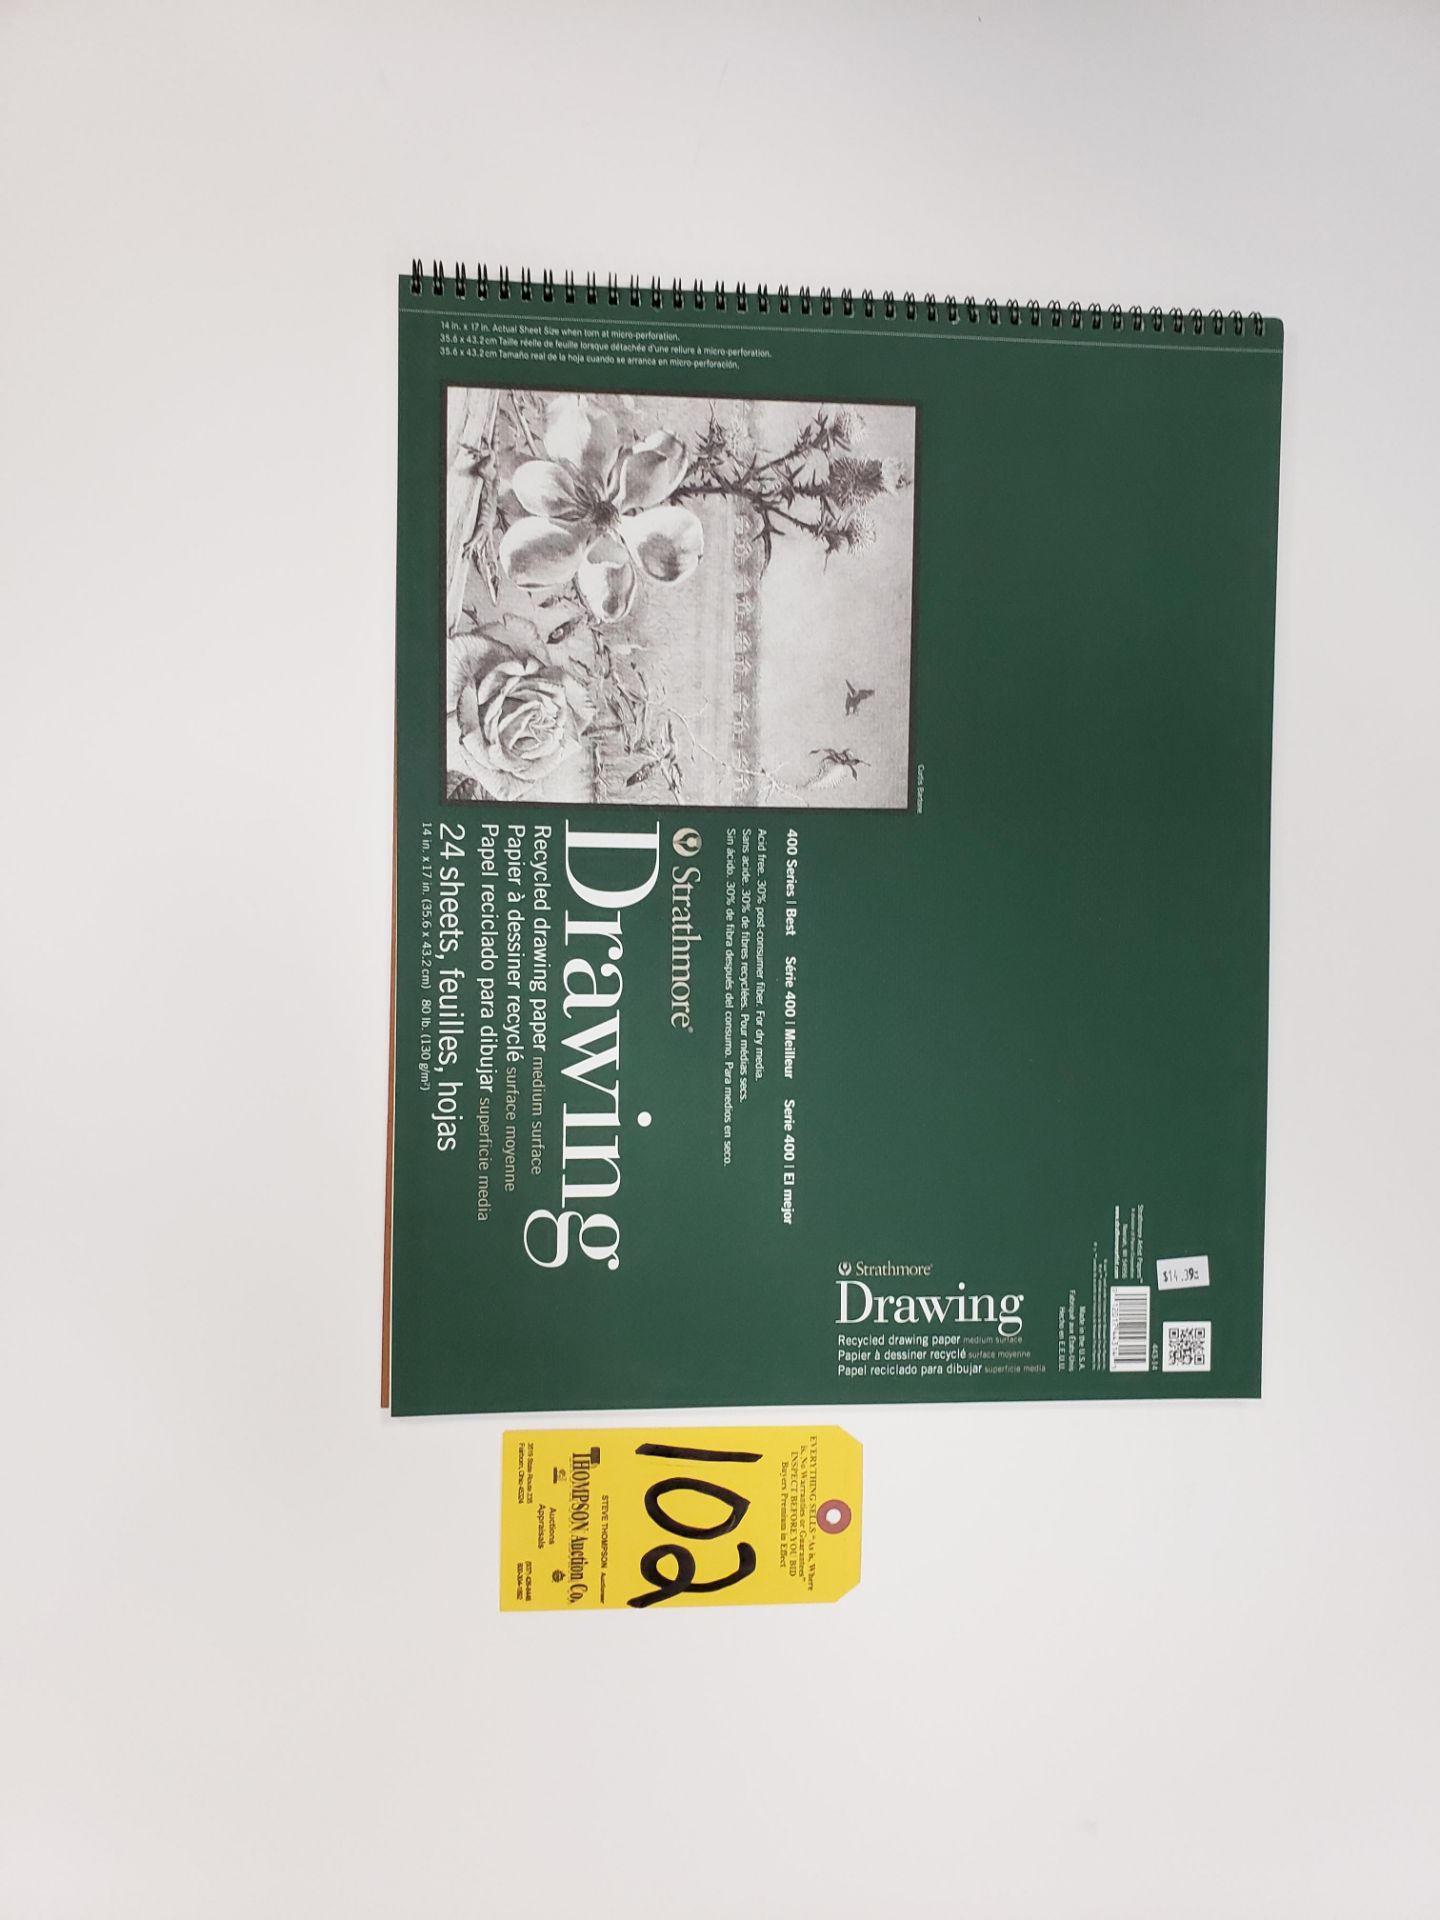 (7) Strathmore 400 Series Recycled Drawing Paper, 24 Sheets